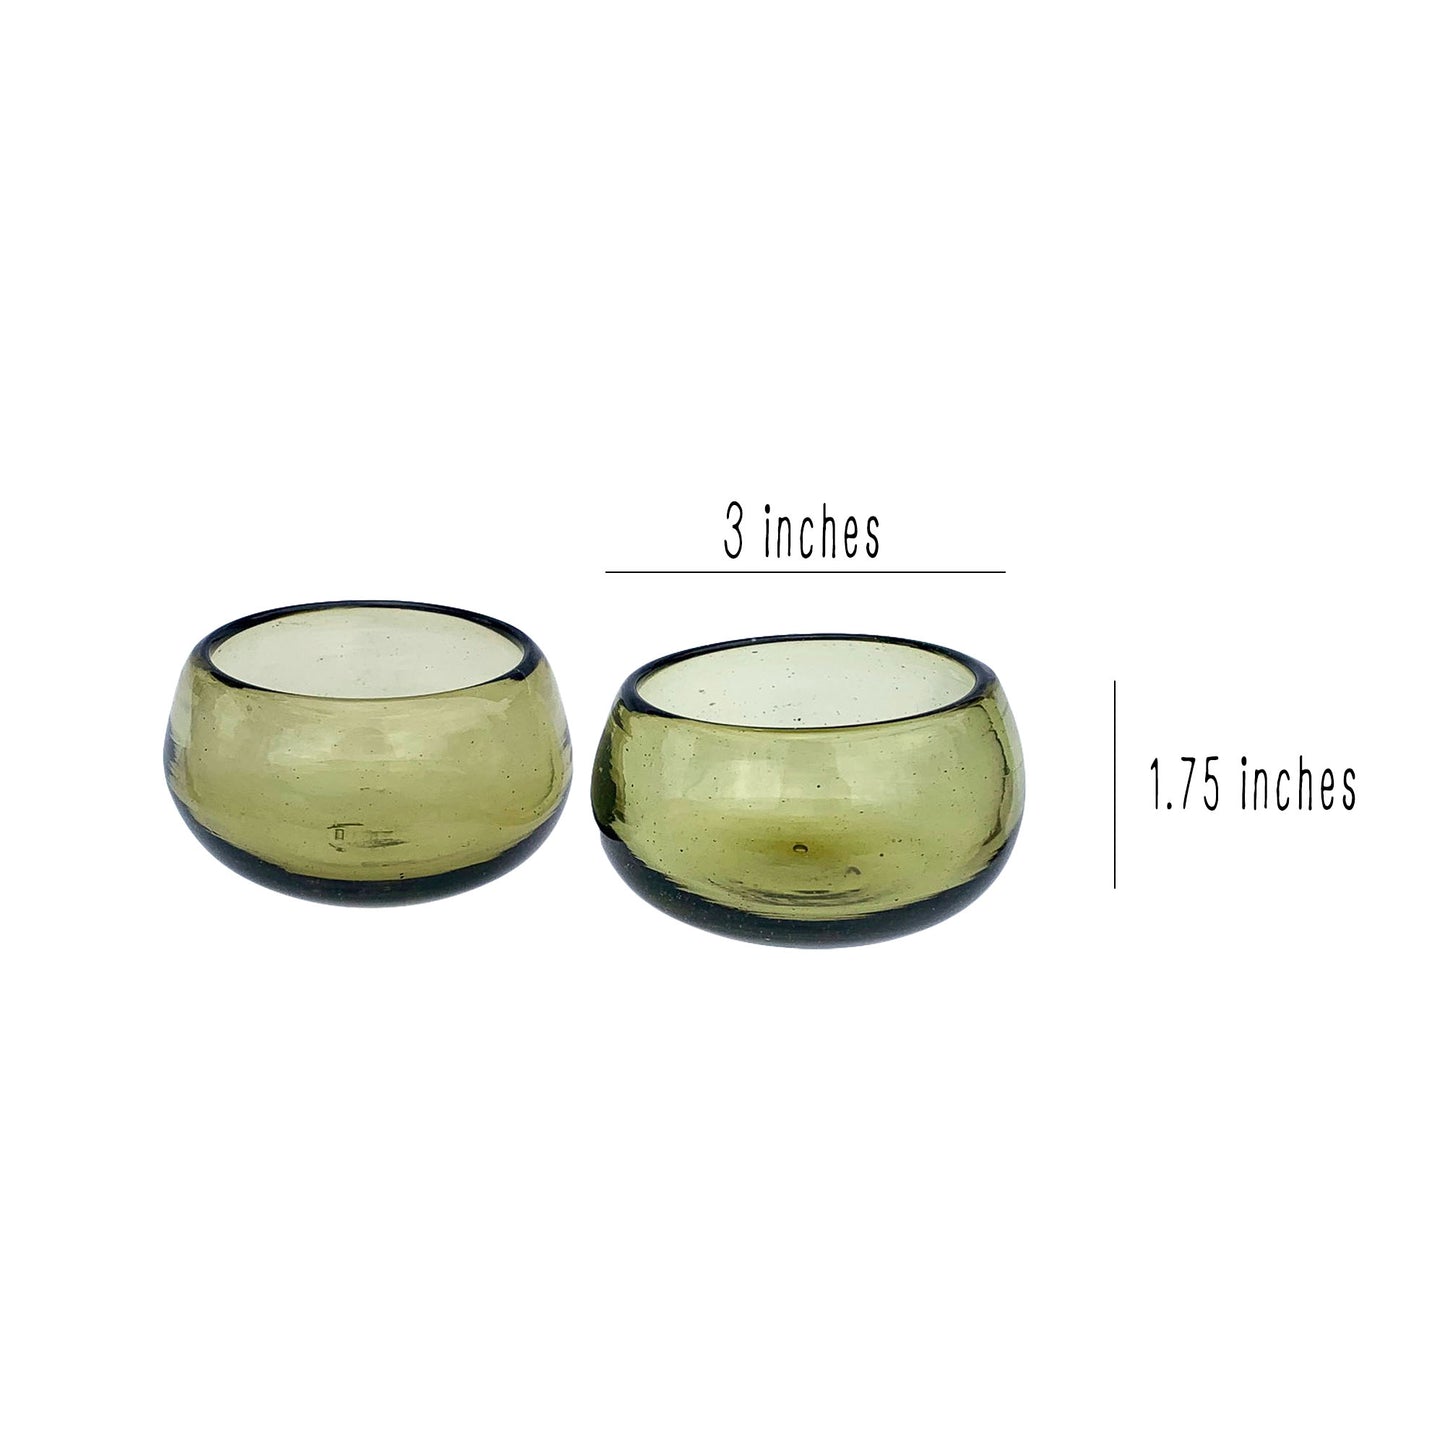 Mexican Hand Blown Recycled Glass Copitas for Mezcal or Tequila | Handmade Wide Mouth Shot Glasses in Olive Green